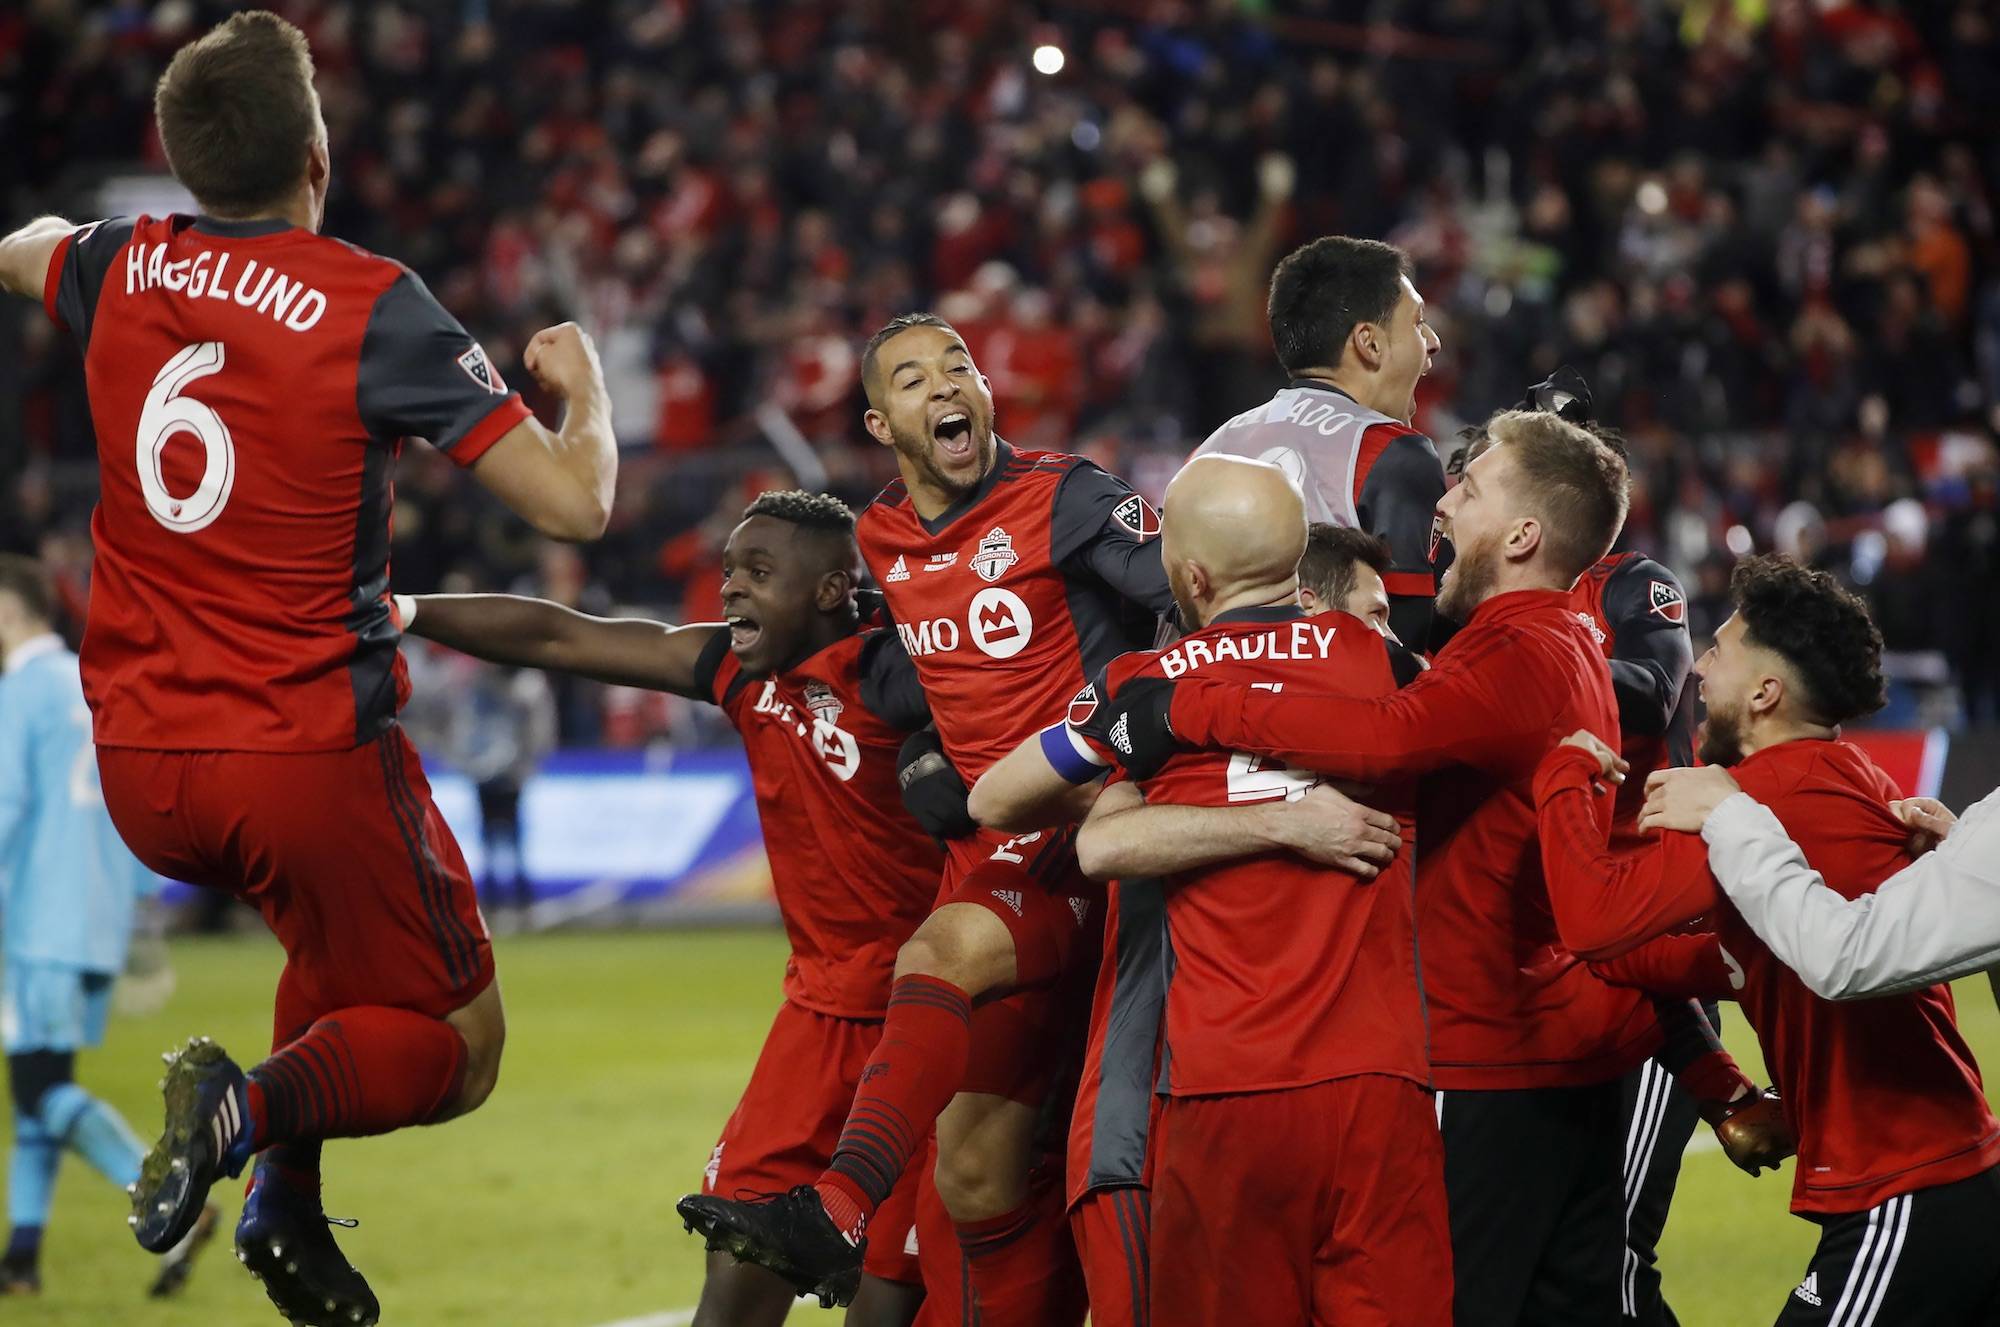 Toronto FC players celebrate a goal by midfielder Victor Vazquez (obscured) in stoppage time against the Seattle Sounders during second-half MLS Cup final soccer action in Toronto, Saturday, Dec. 9, 2017. (Mark Blinch/The Canadian Press via AP)